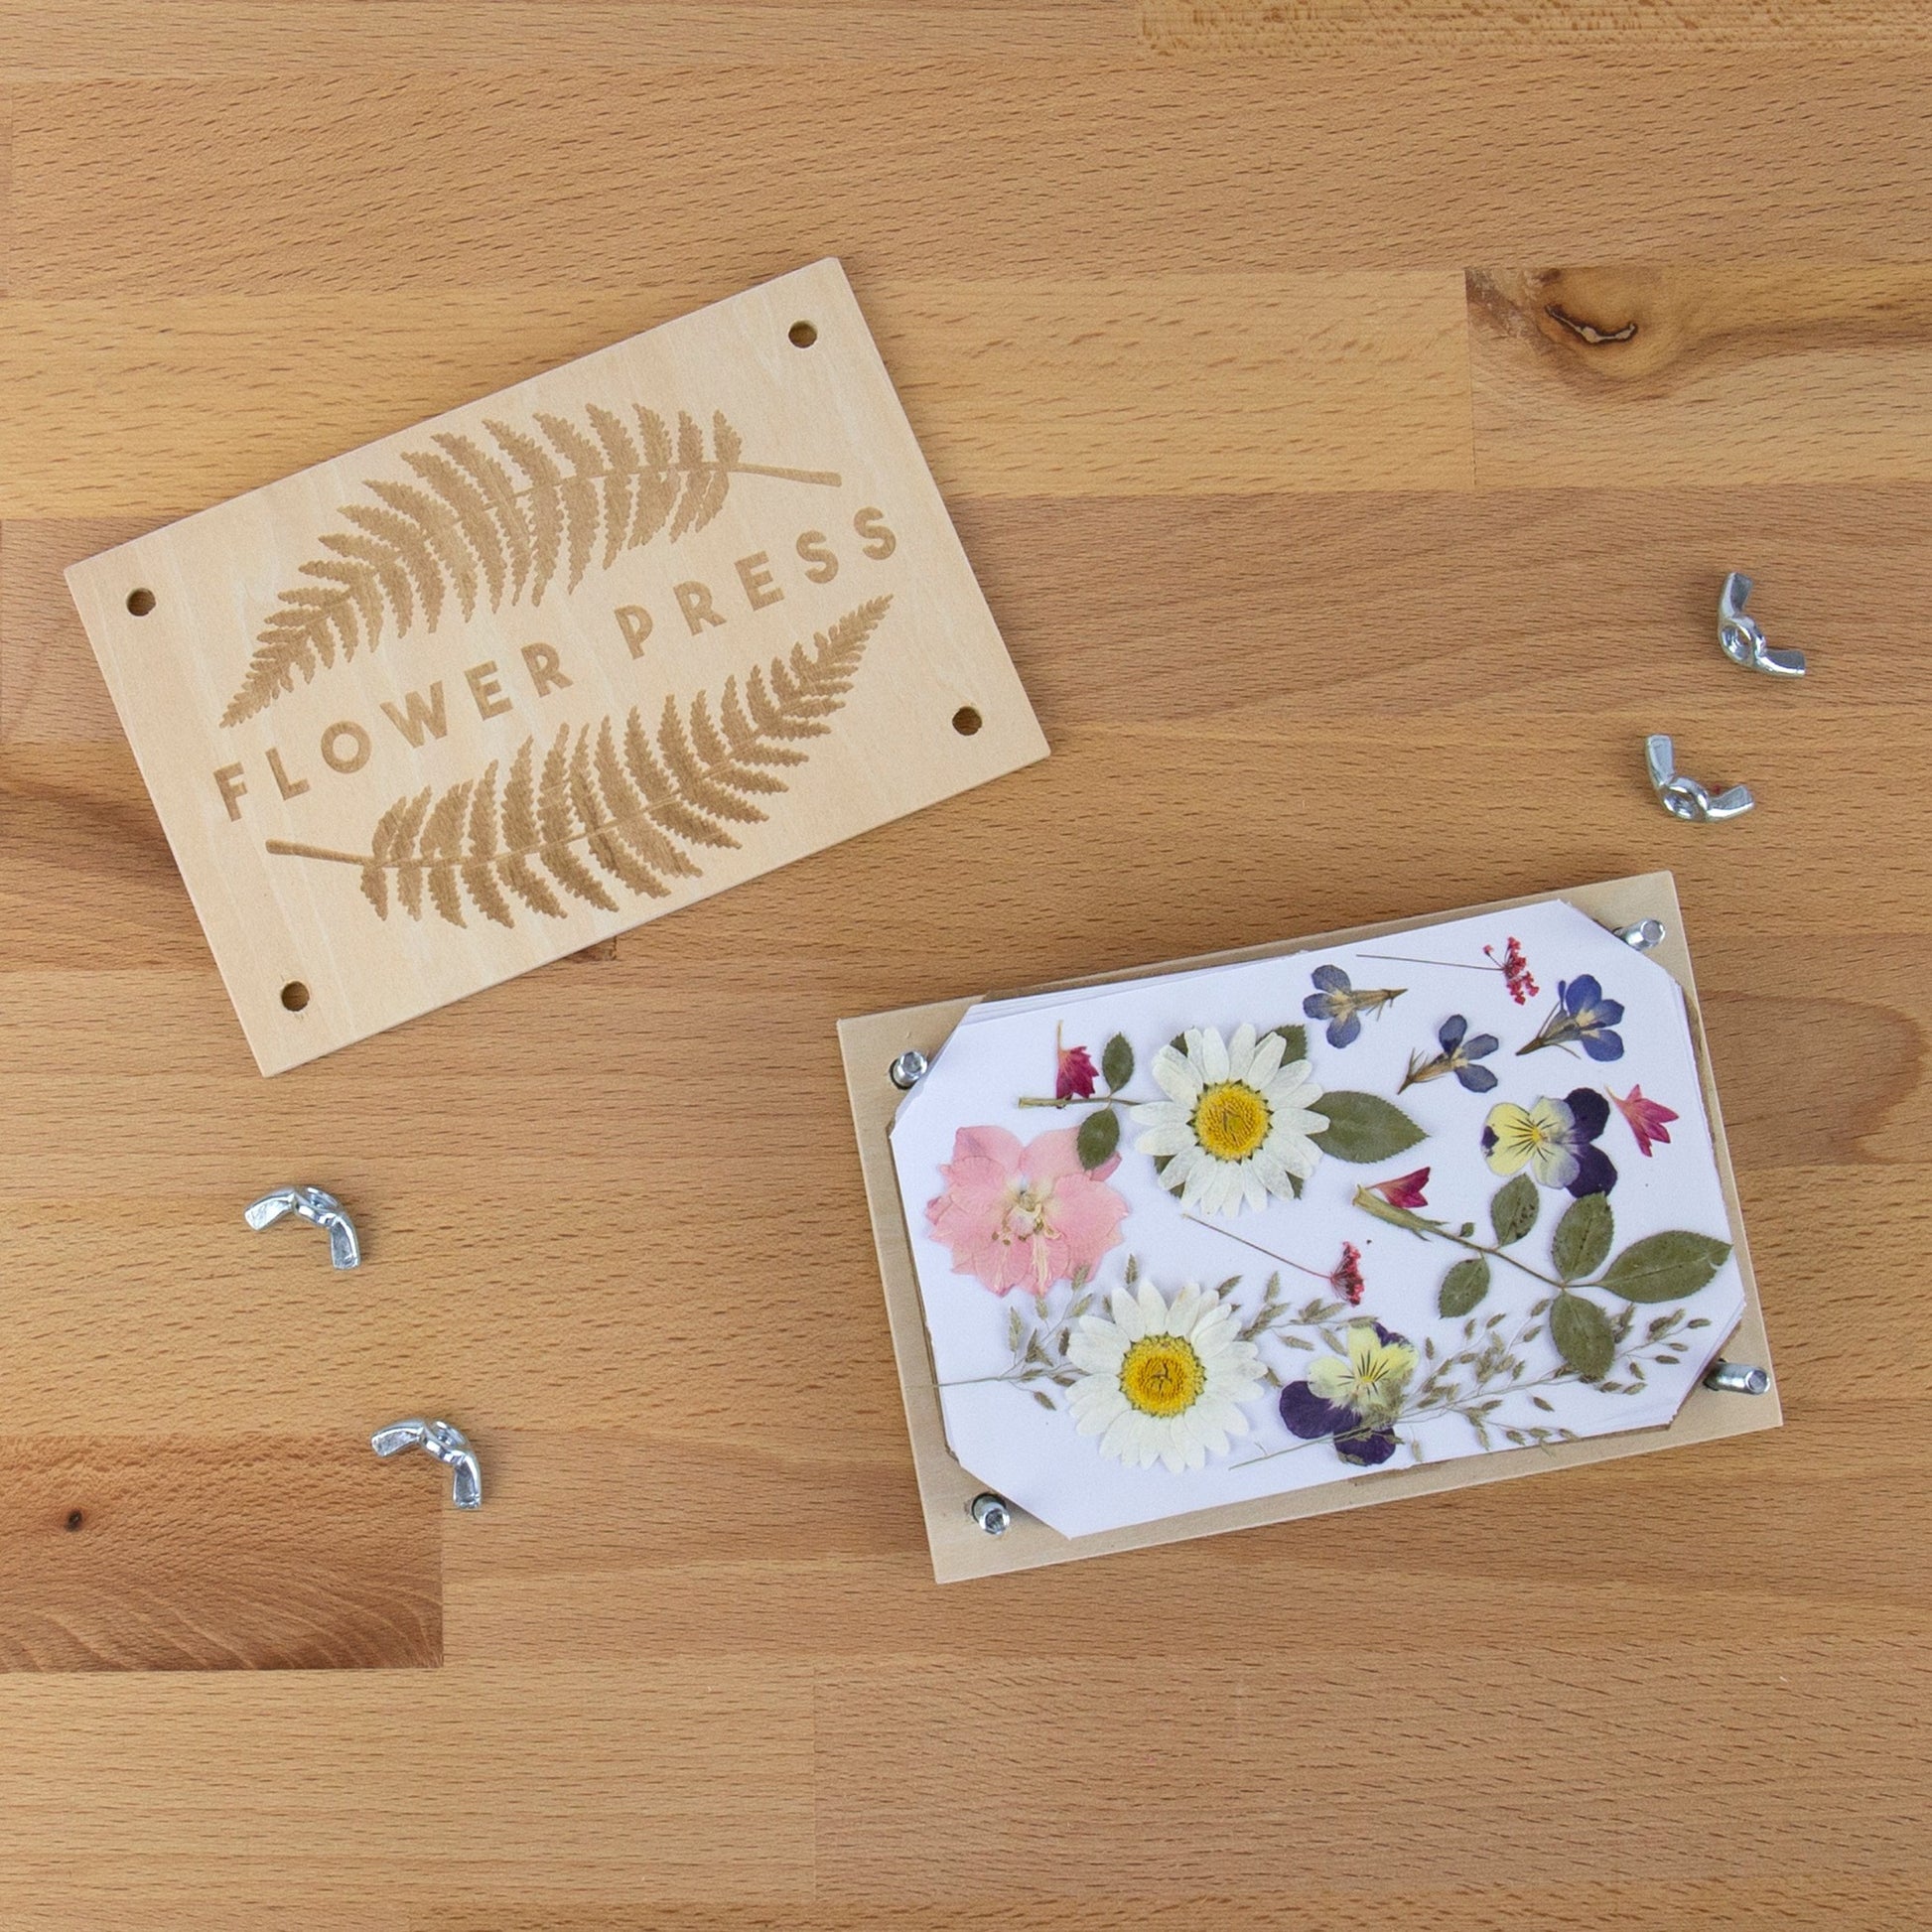 Large Wooden Flower Pressing Kit - DIY Arts and Craft Kit with Dried  Flowers - 10 Layers - Solid Maple Wood Flower Press Kit for Adults with  Storage B for Sale in Warwick, PA - OfferUp